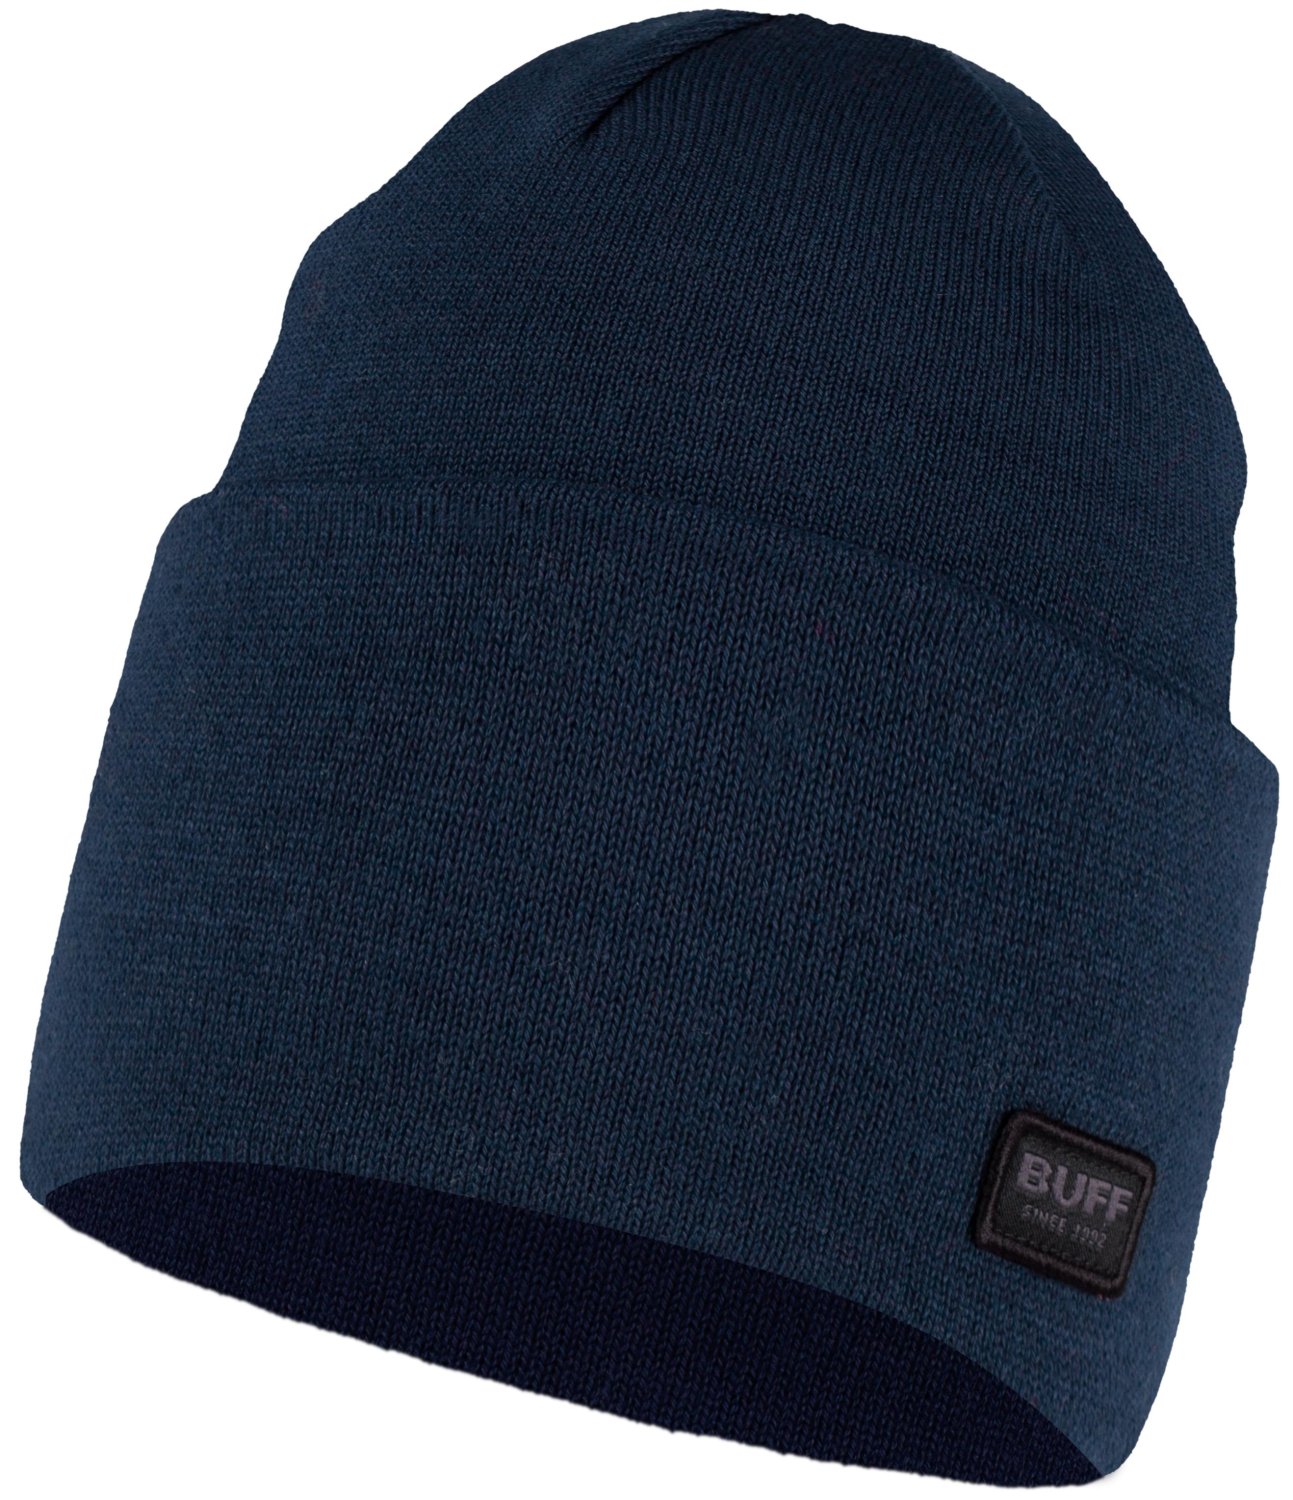 Шапка Buff Knitted Hat Niels Denim, US:one size, 126457.788.10.00 шапка buff knitted hat bonky eyes denim us one size 129626 788 10 00